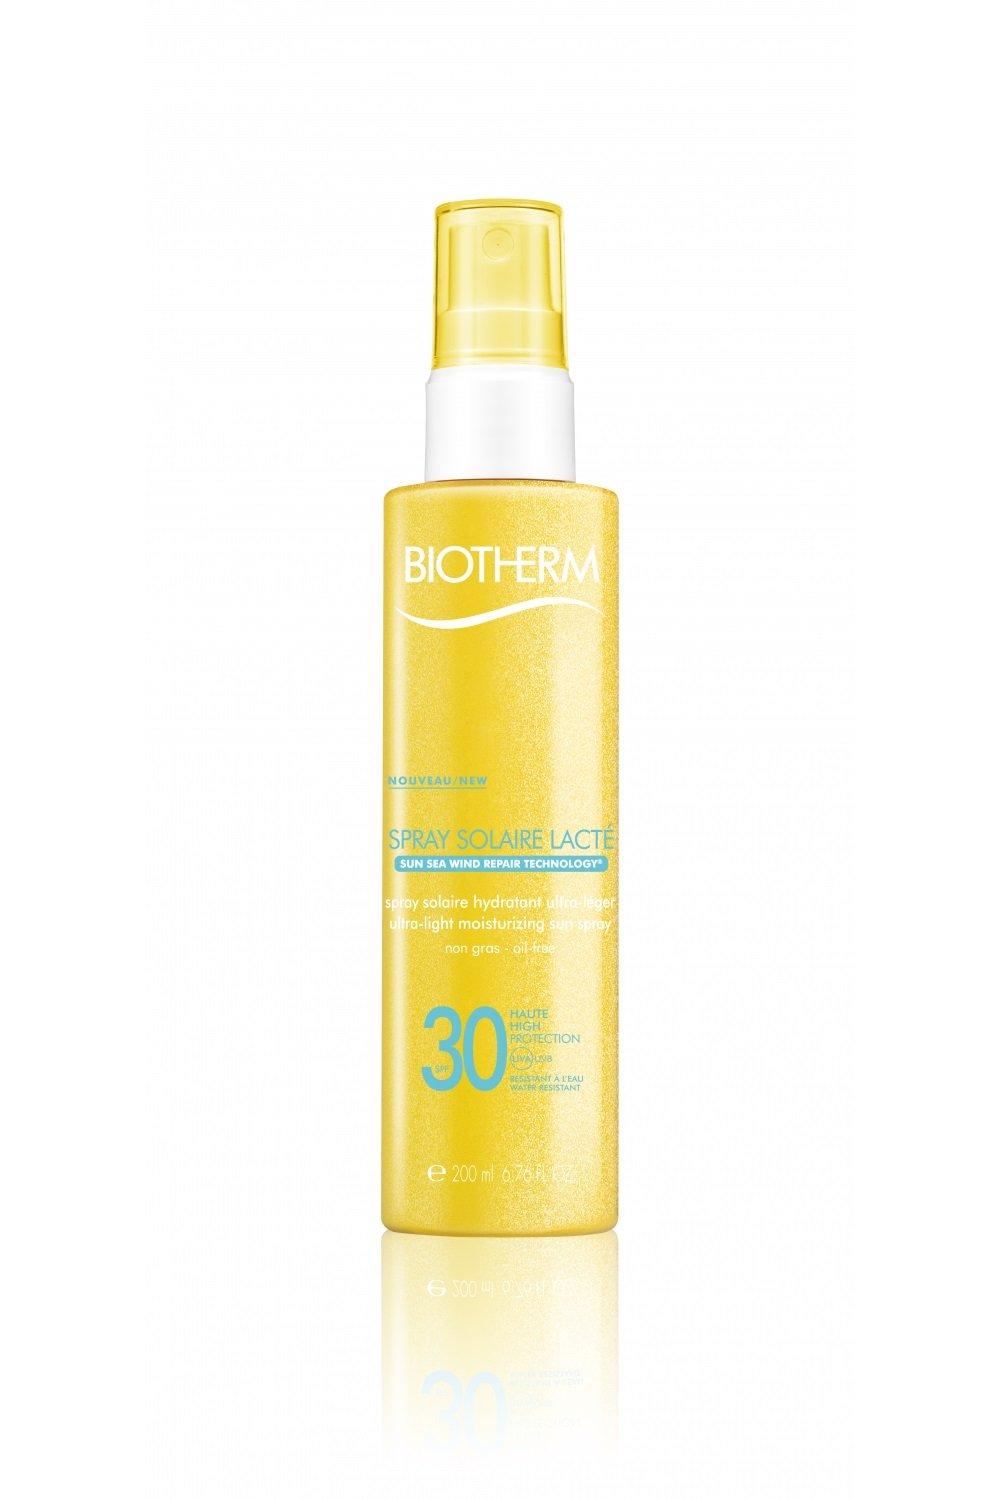 Image of BIOTHERM Spray Solaire Lacté SPF30 - 200ml